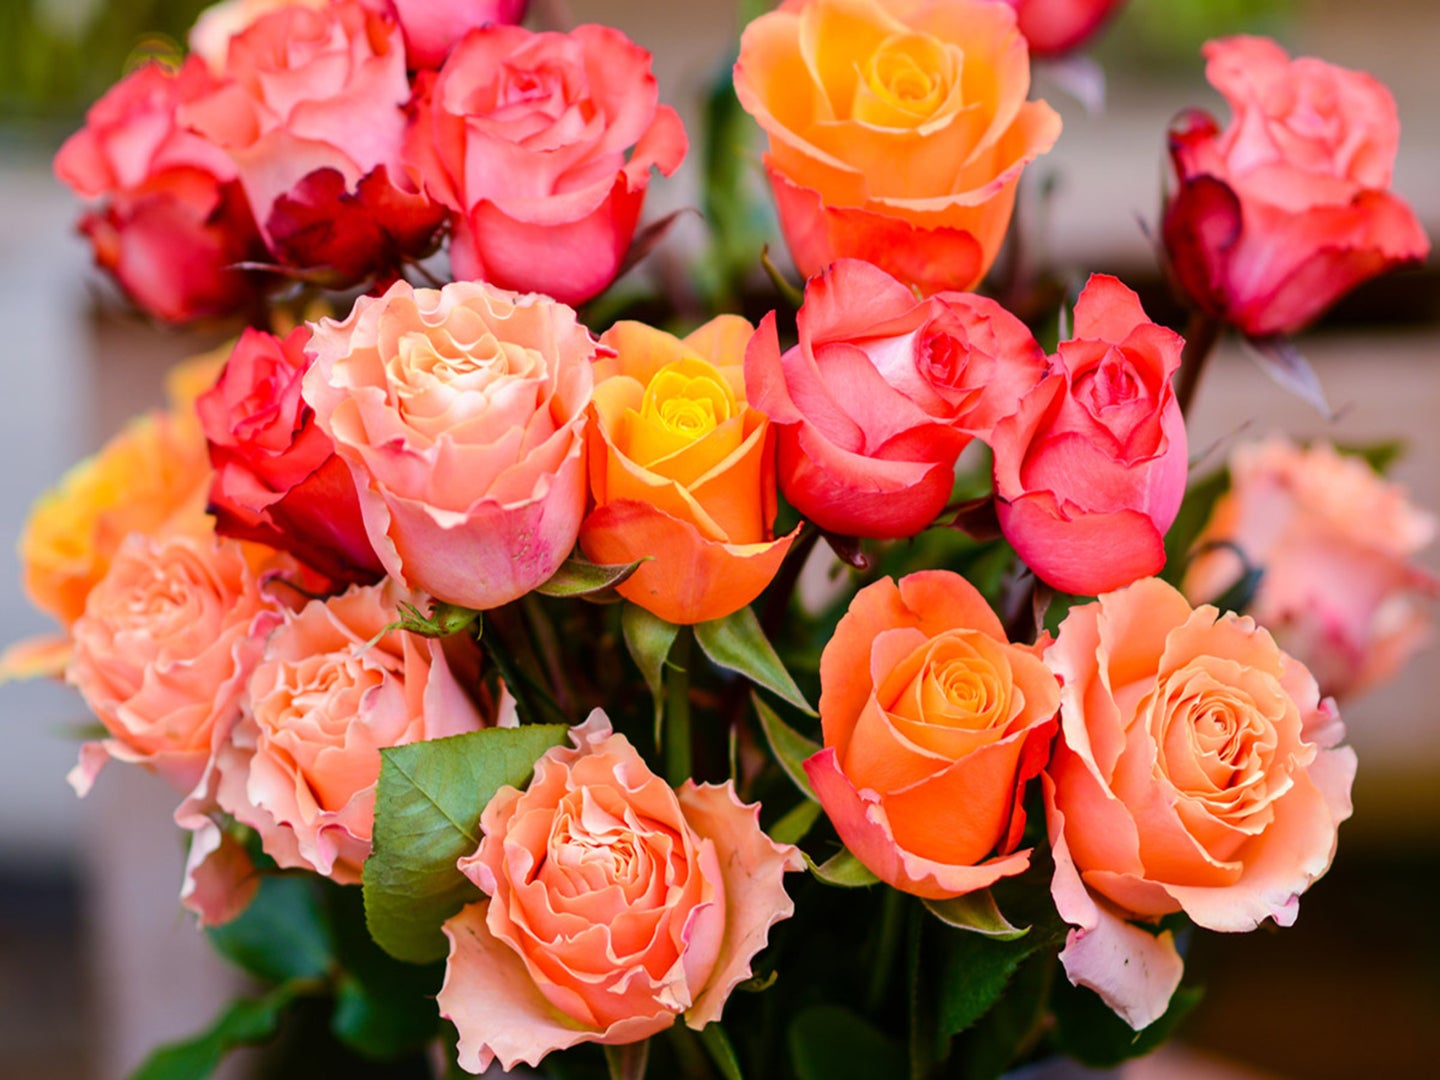 A bouquet of pink and orange roses